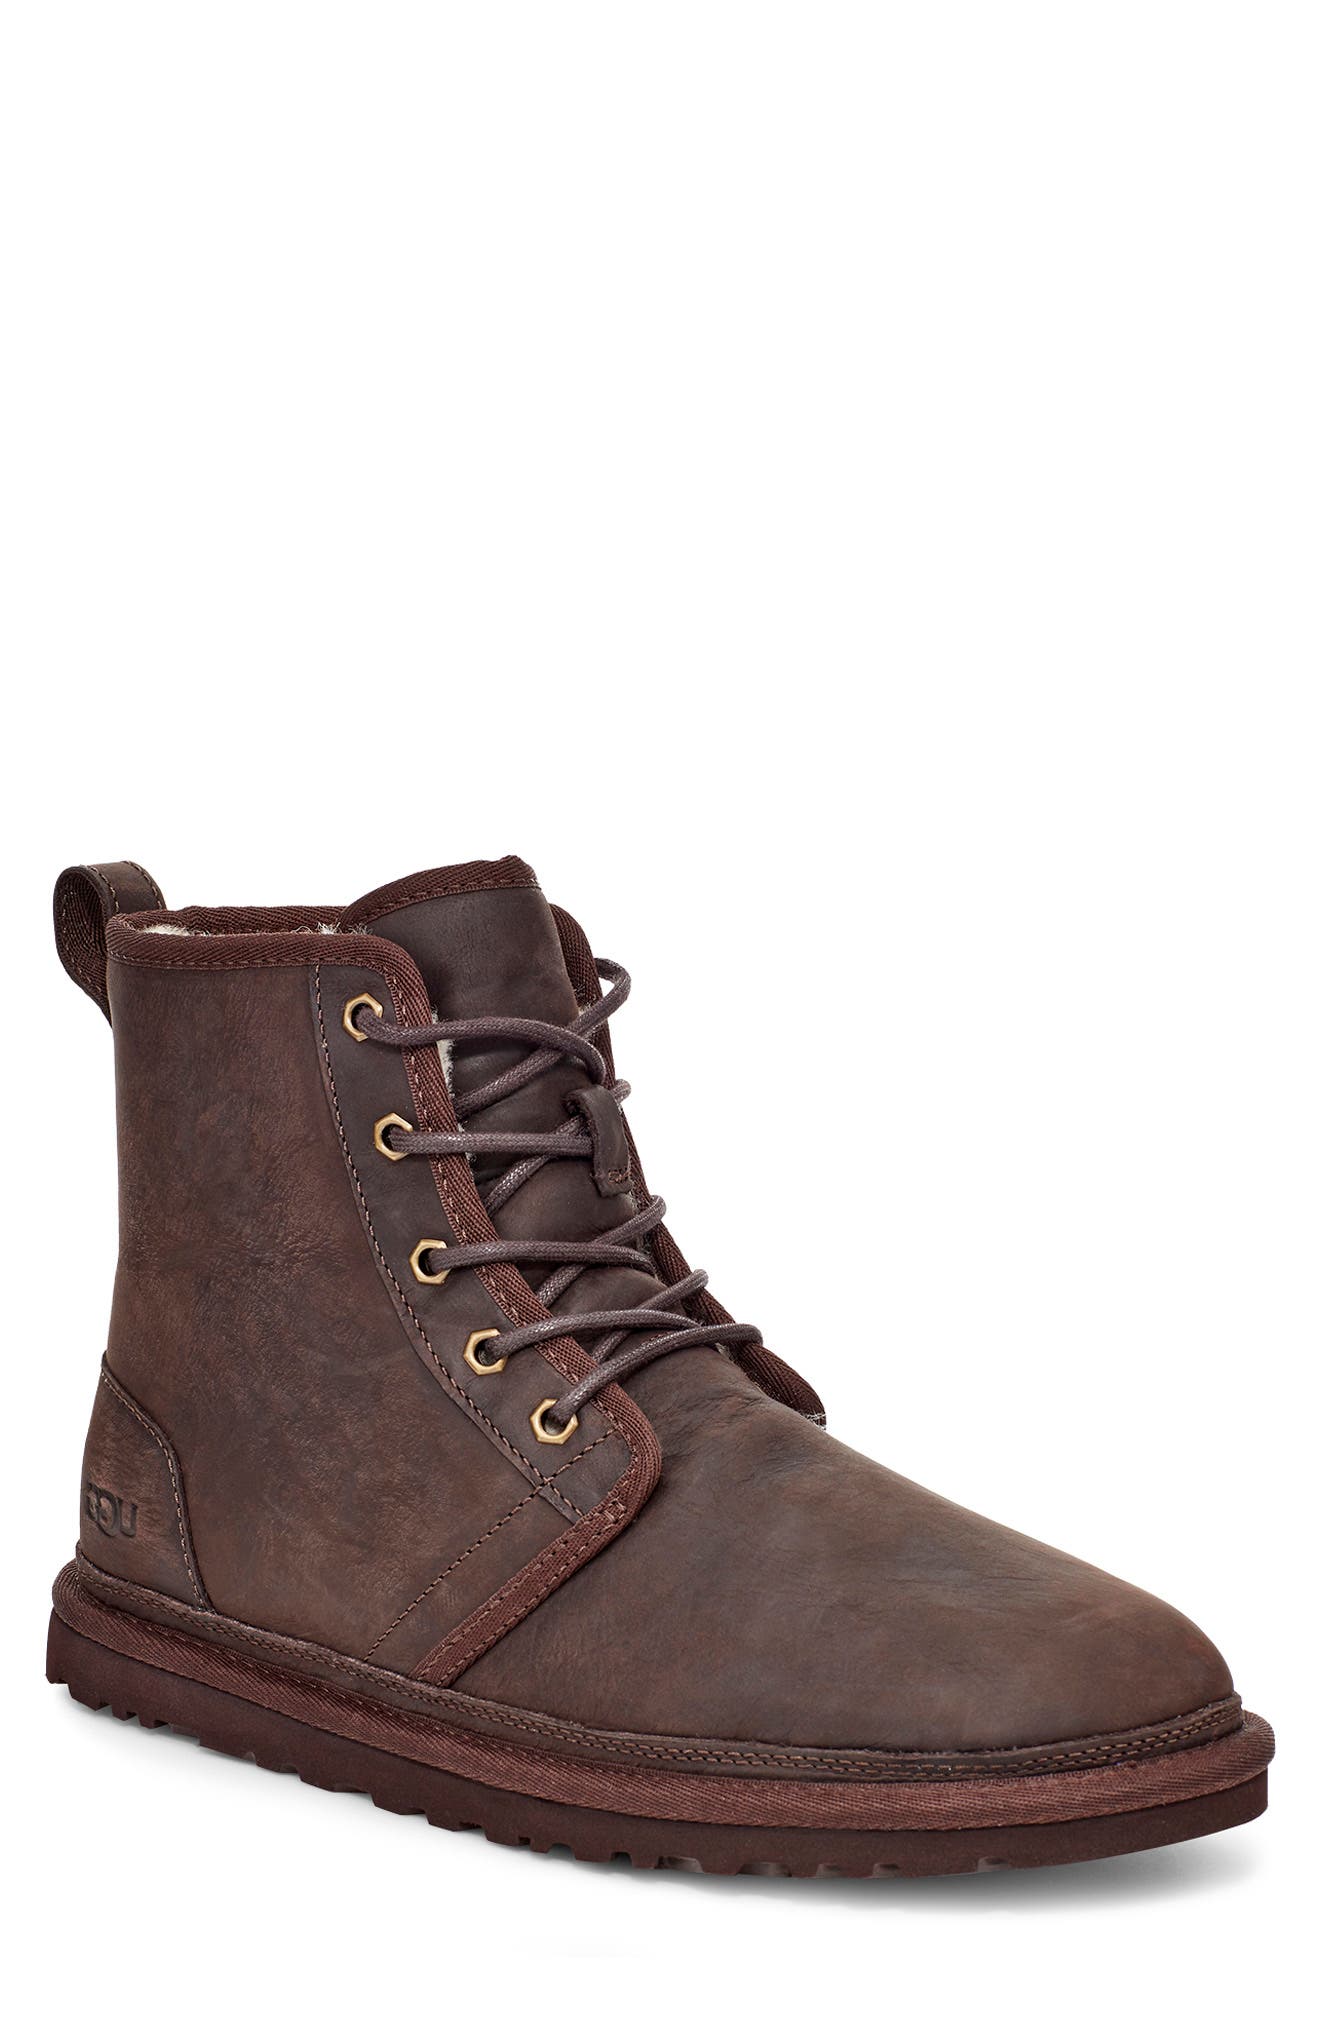 ugg men's lace up boots